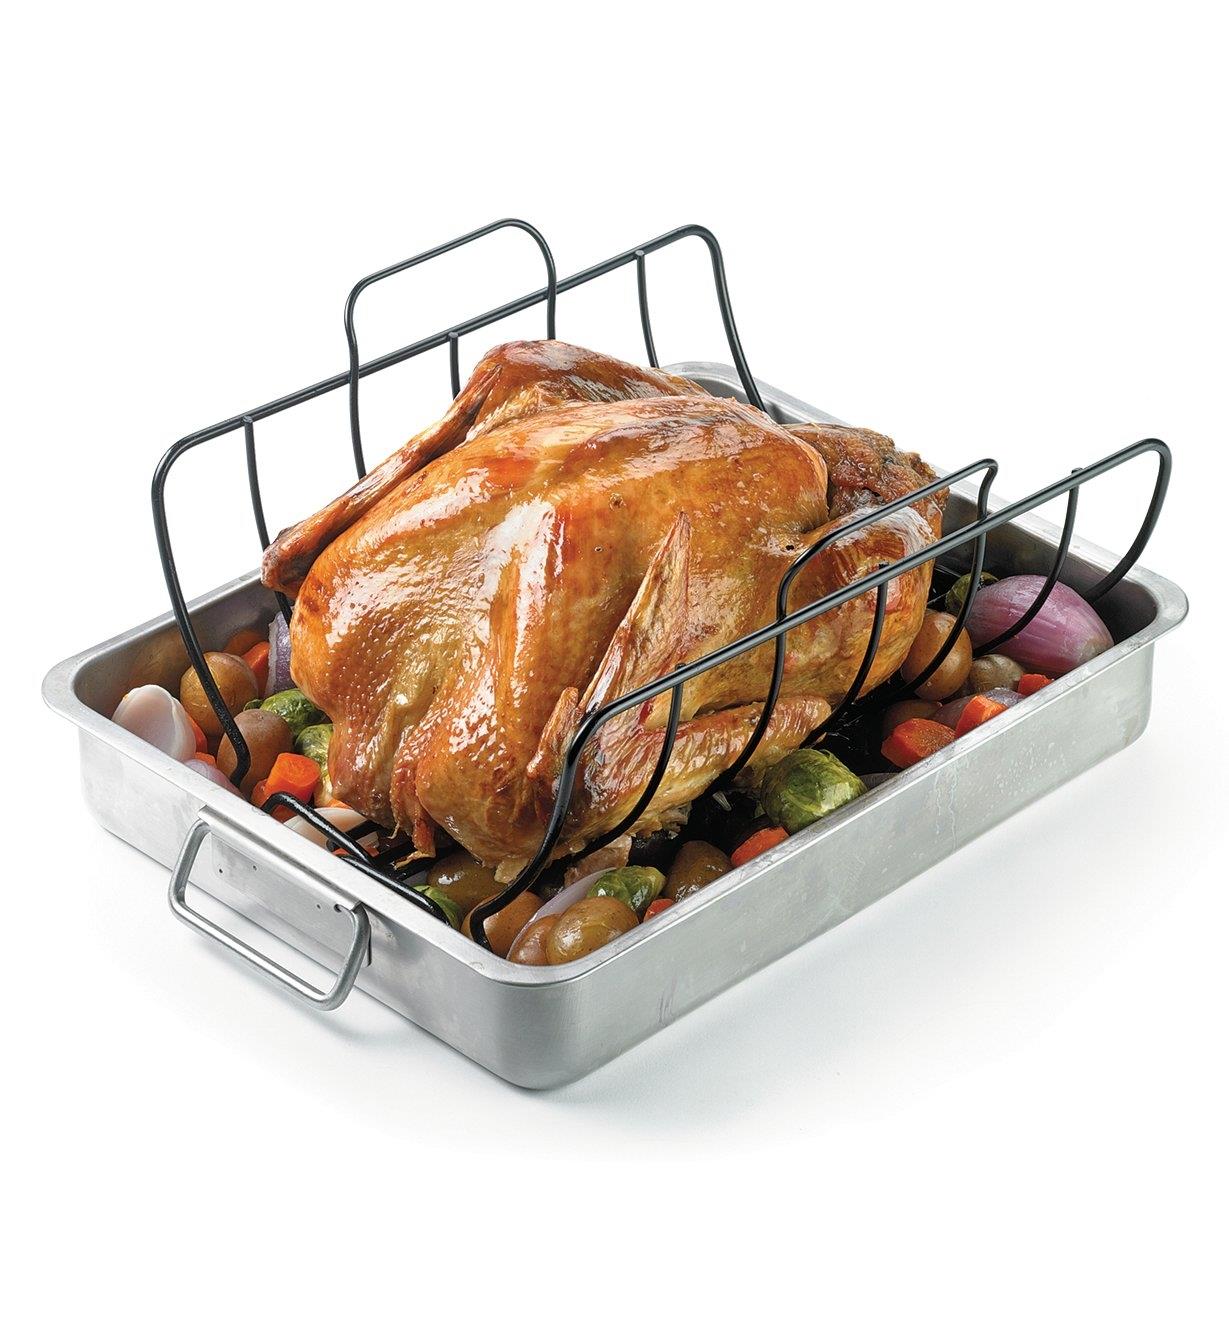 Roast chicken on a roasting rack sitting in a roasting pan with vegetables